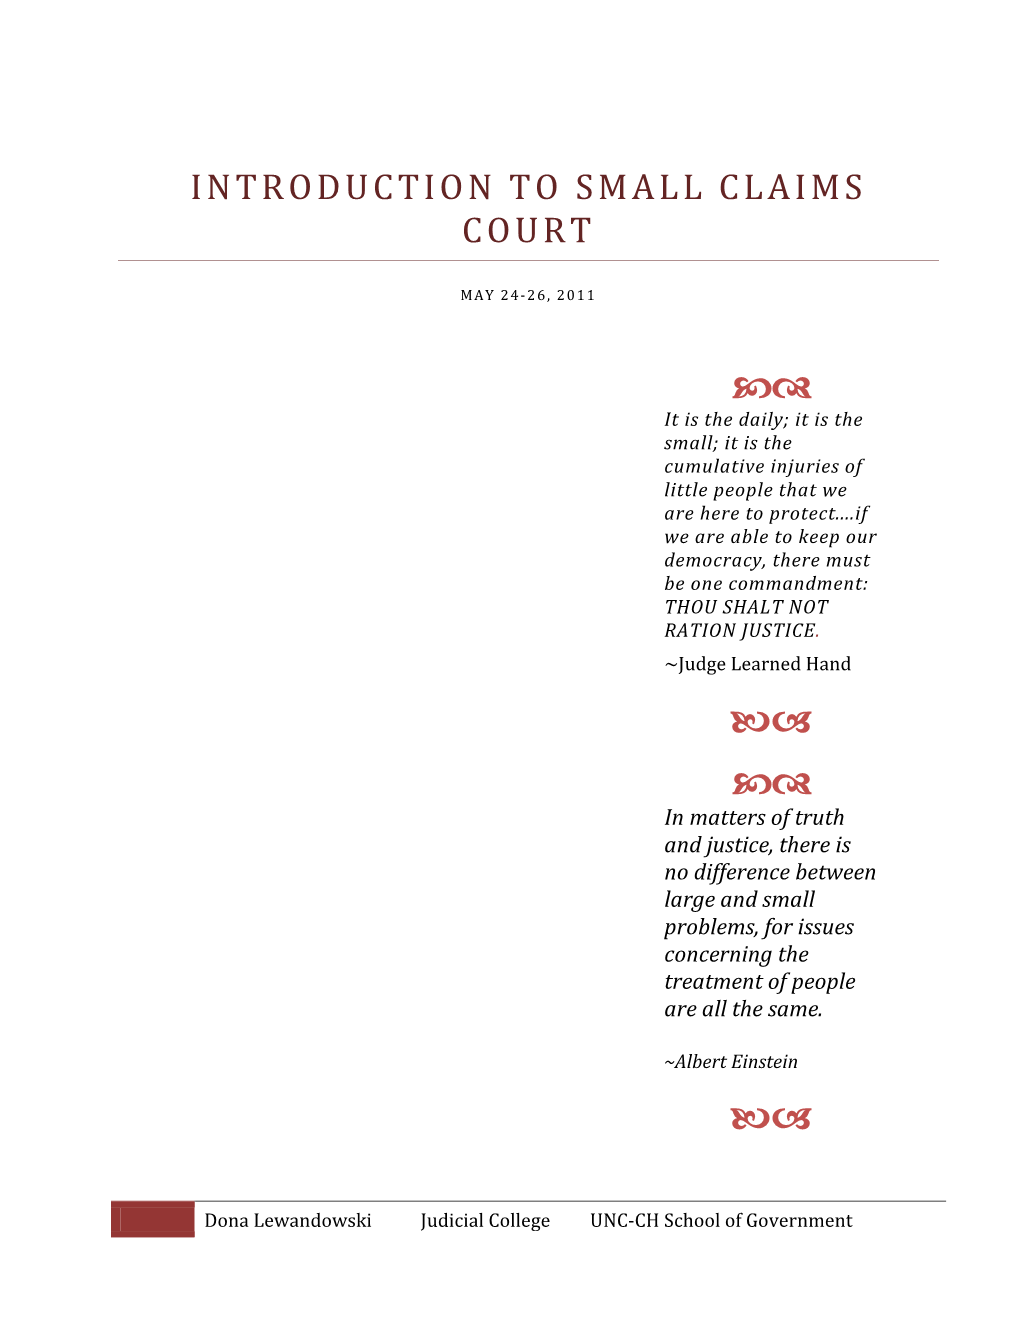 Ntroduction to Small Claims Court